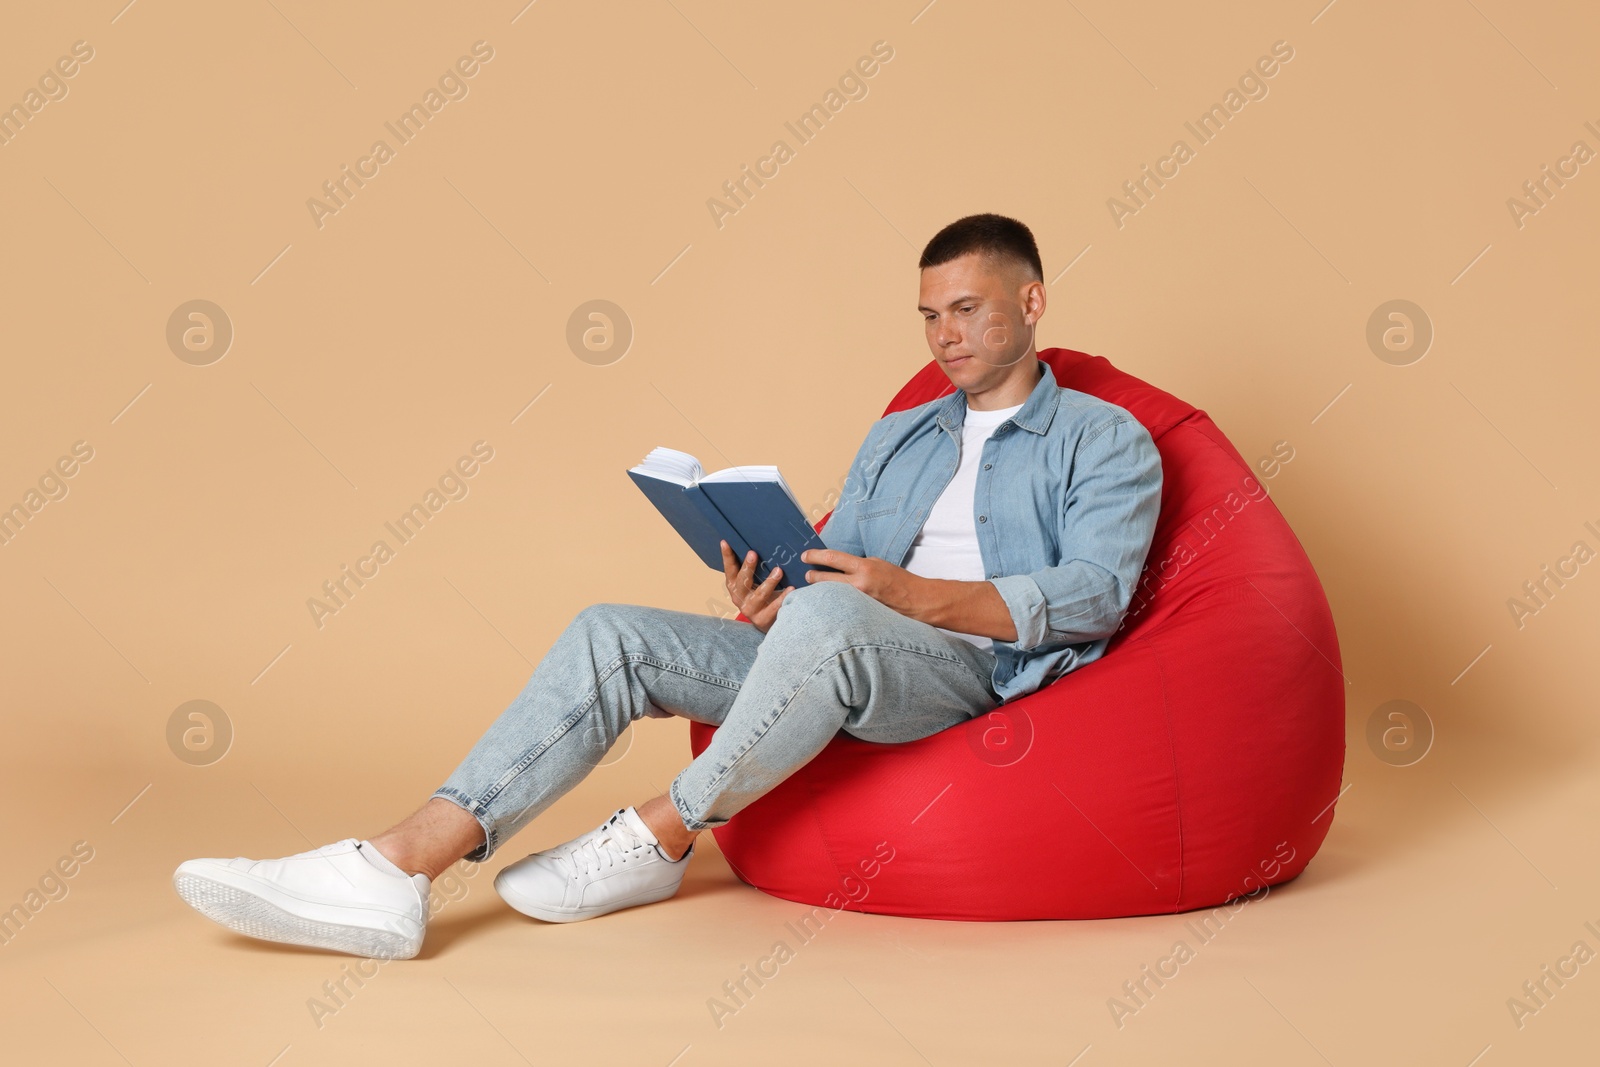 Photo of Handsome man reading book on red bean bag chair against beige background